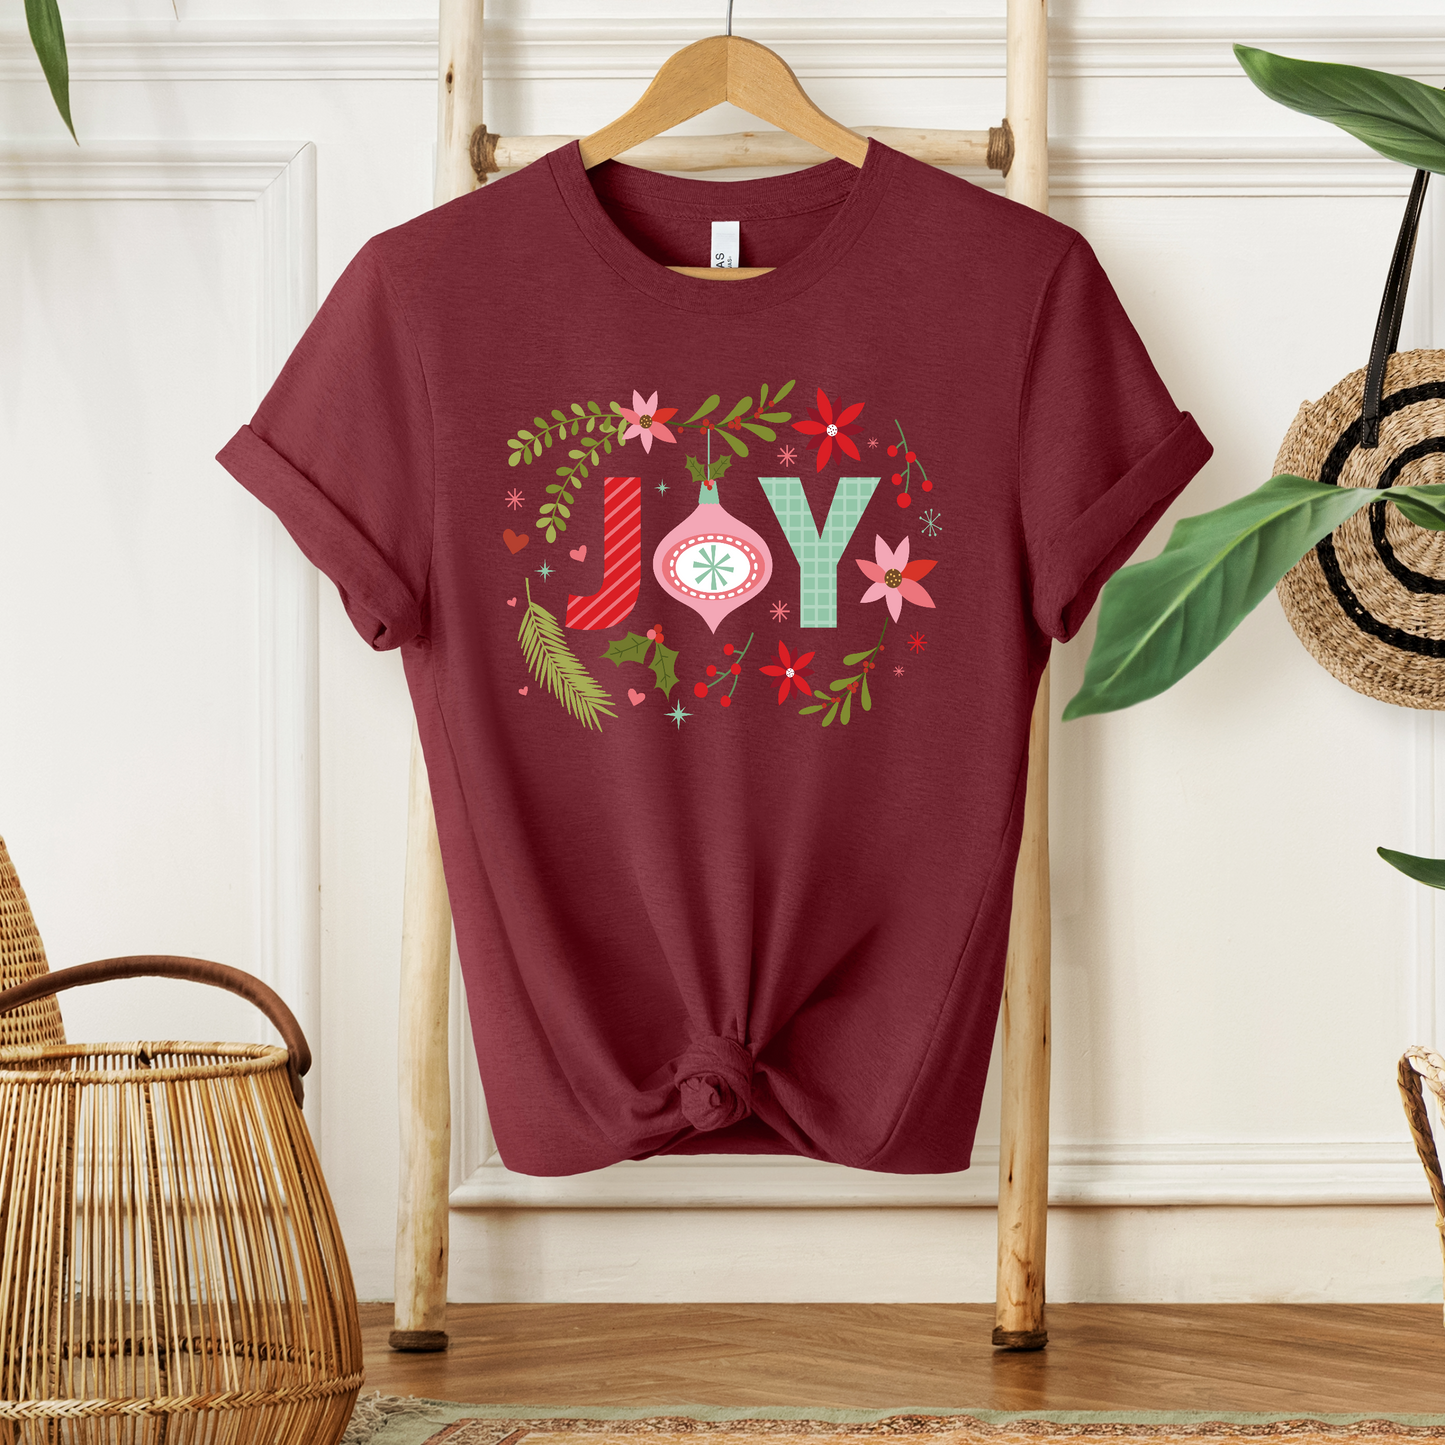 Joy T-Shirt For Christmas T Shirt For Holiday Cheer TShirt For Gift For Her